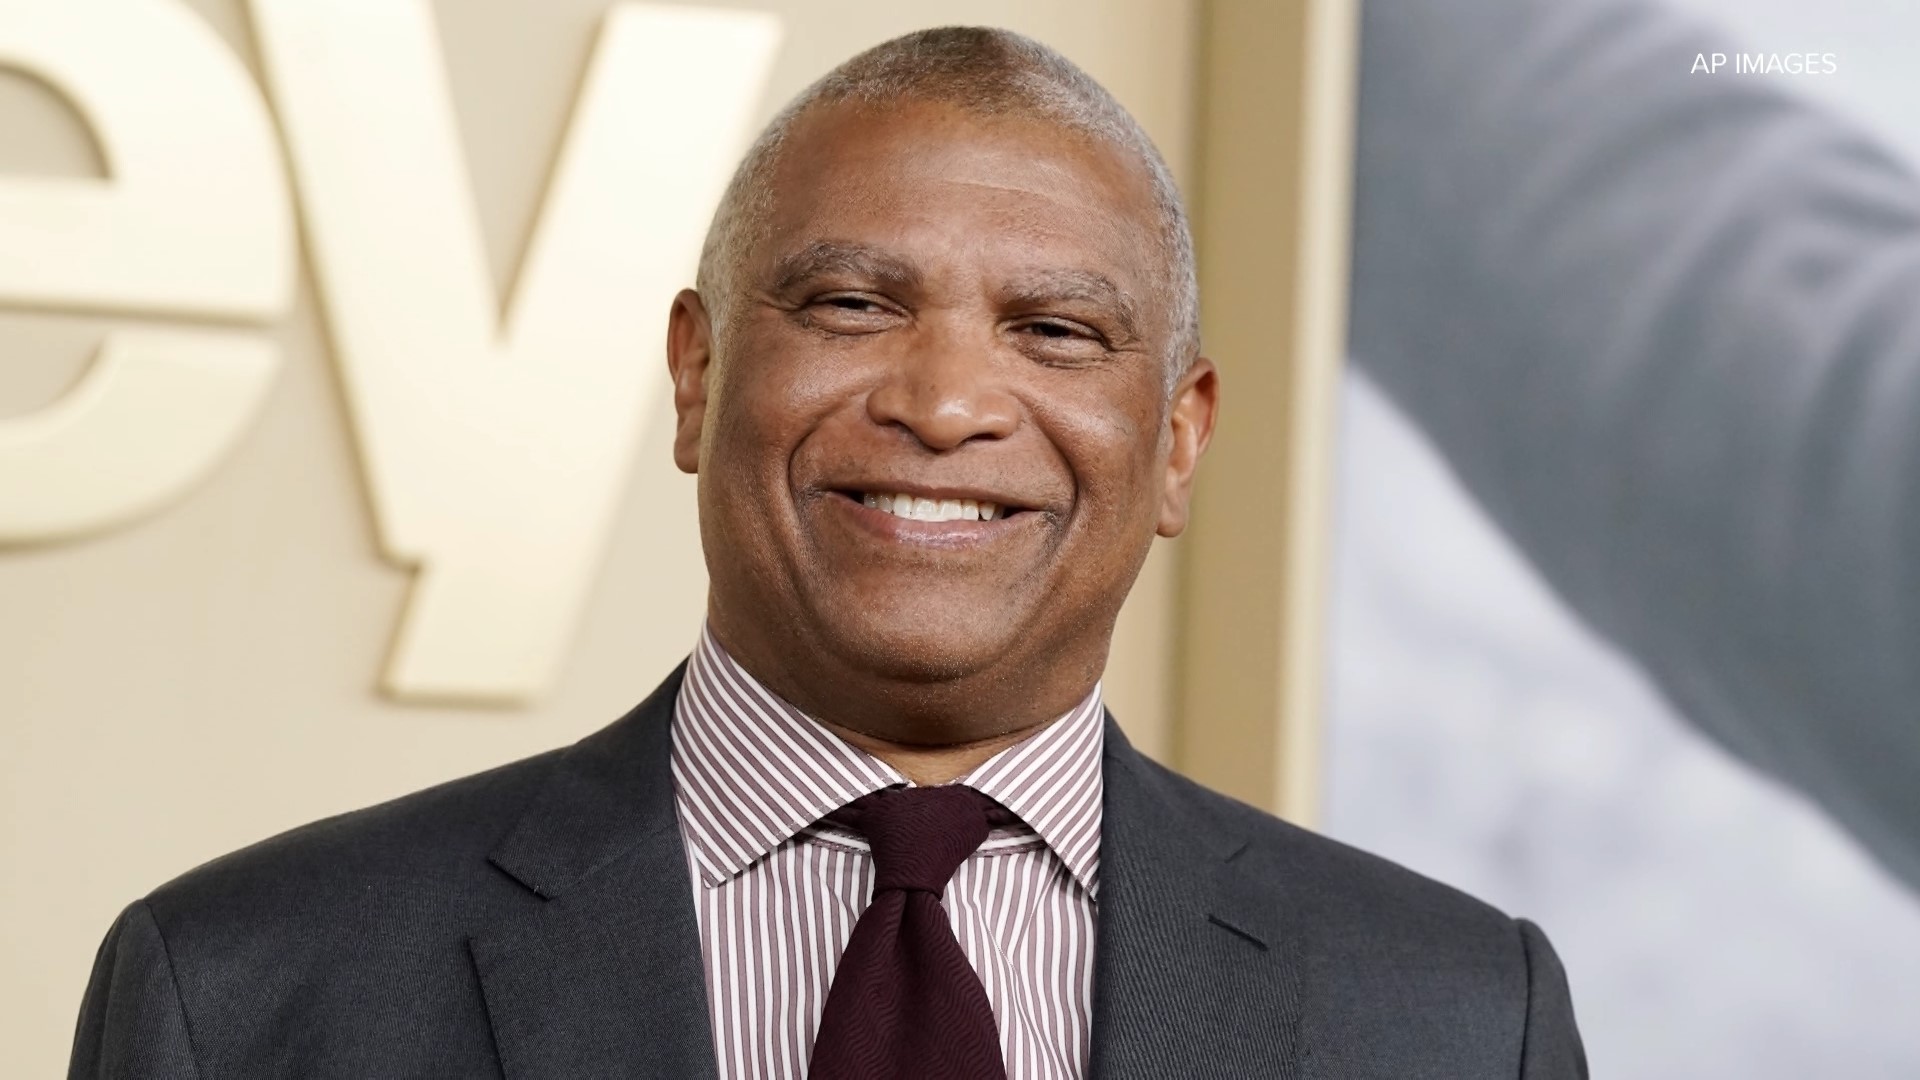 Reginald Hudlin reached a major milestone in his career when he recently received a lifetime achievement award from the St. Louis International Film Festival.